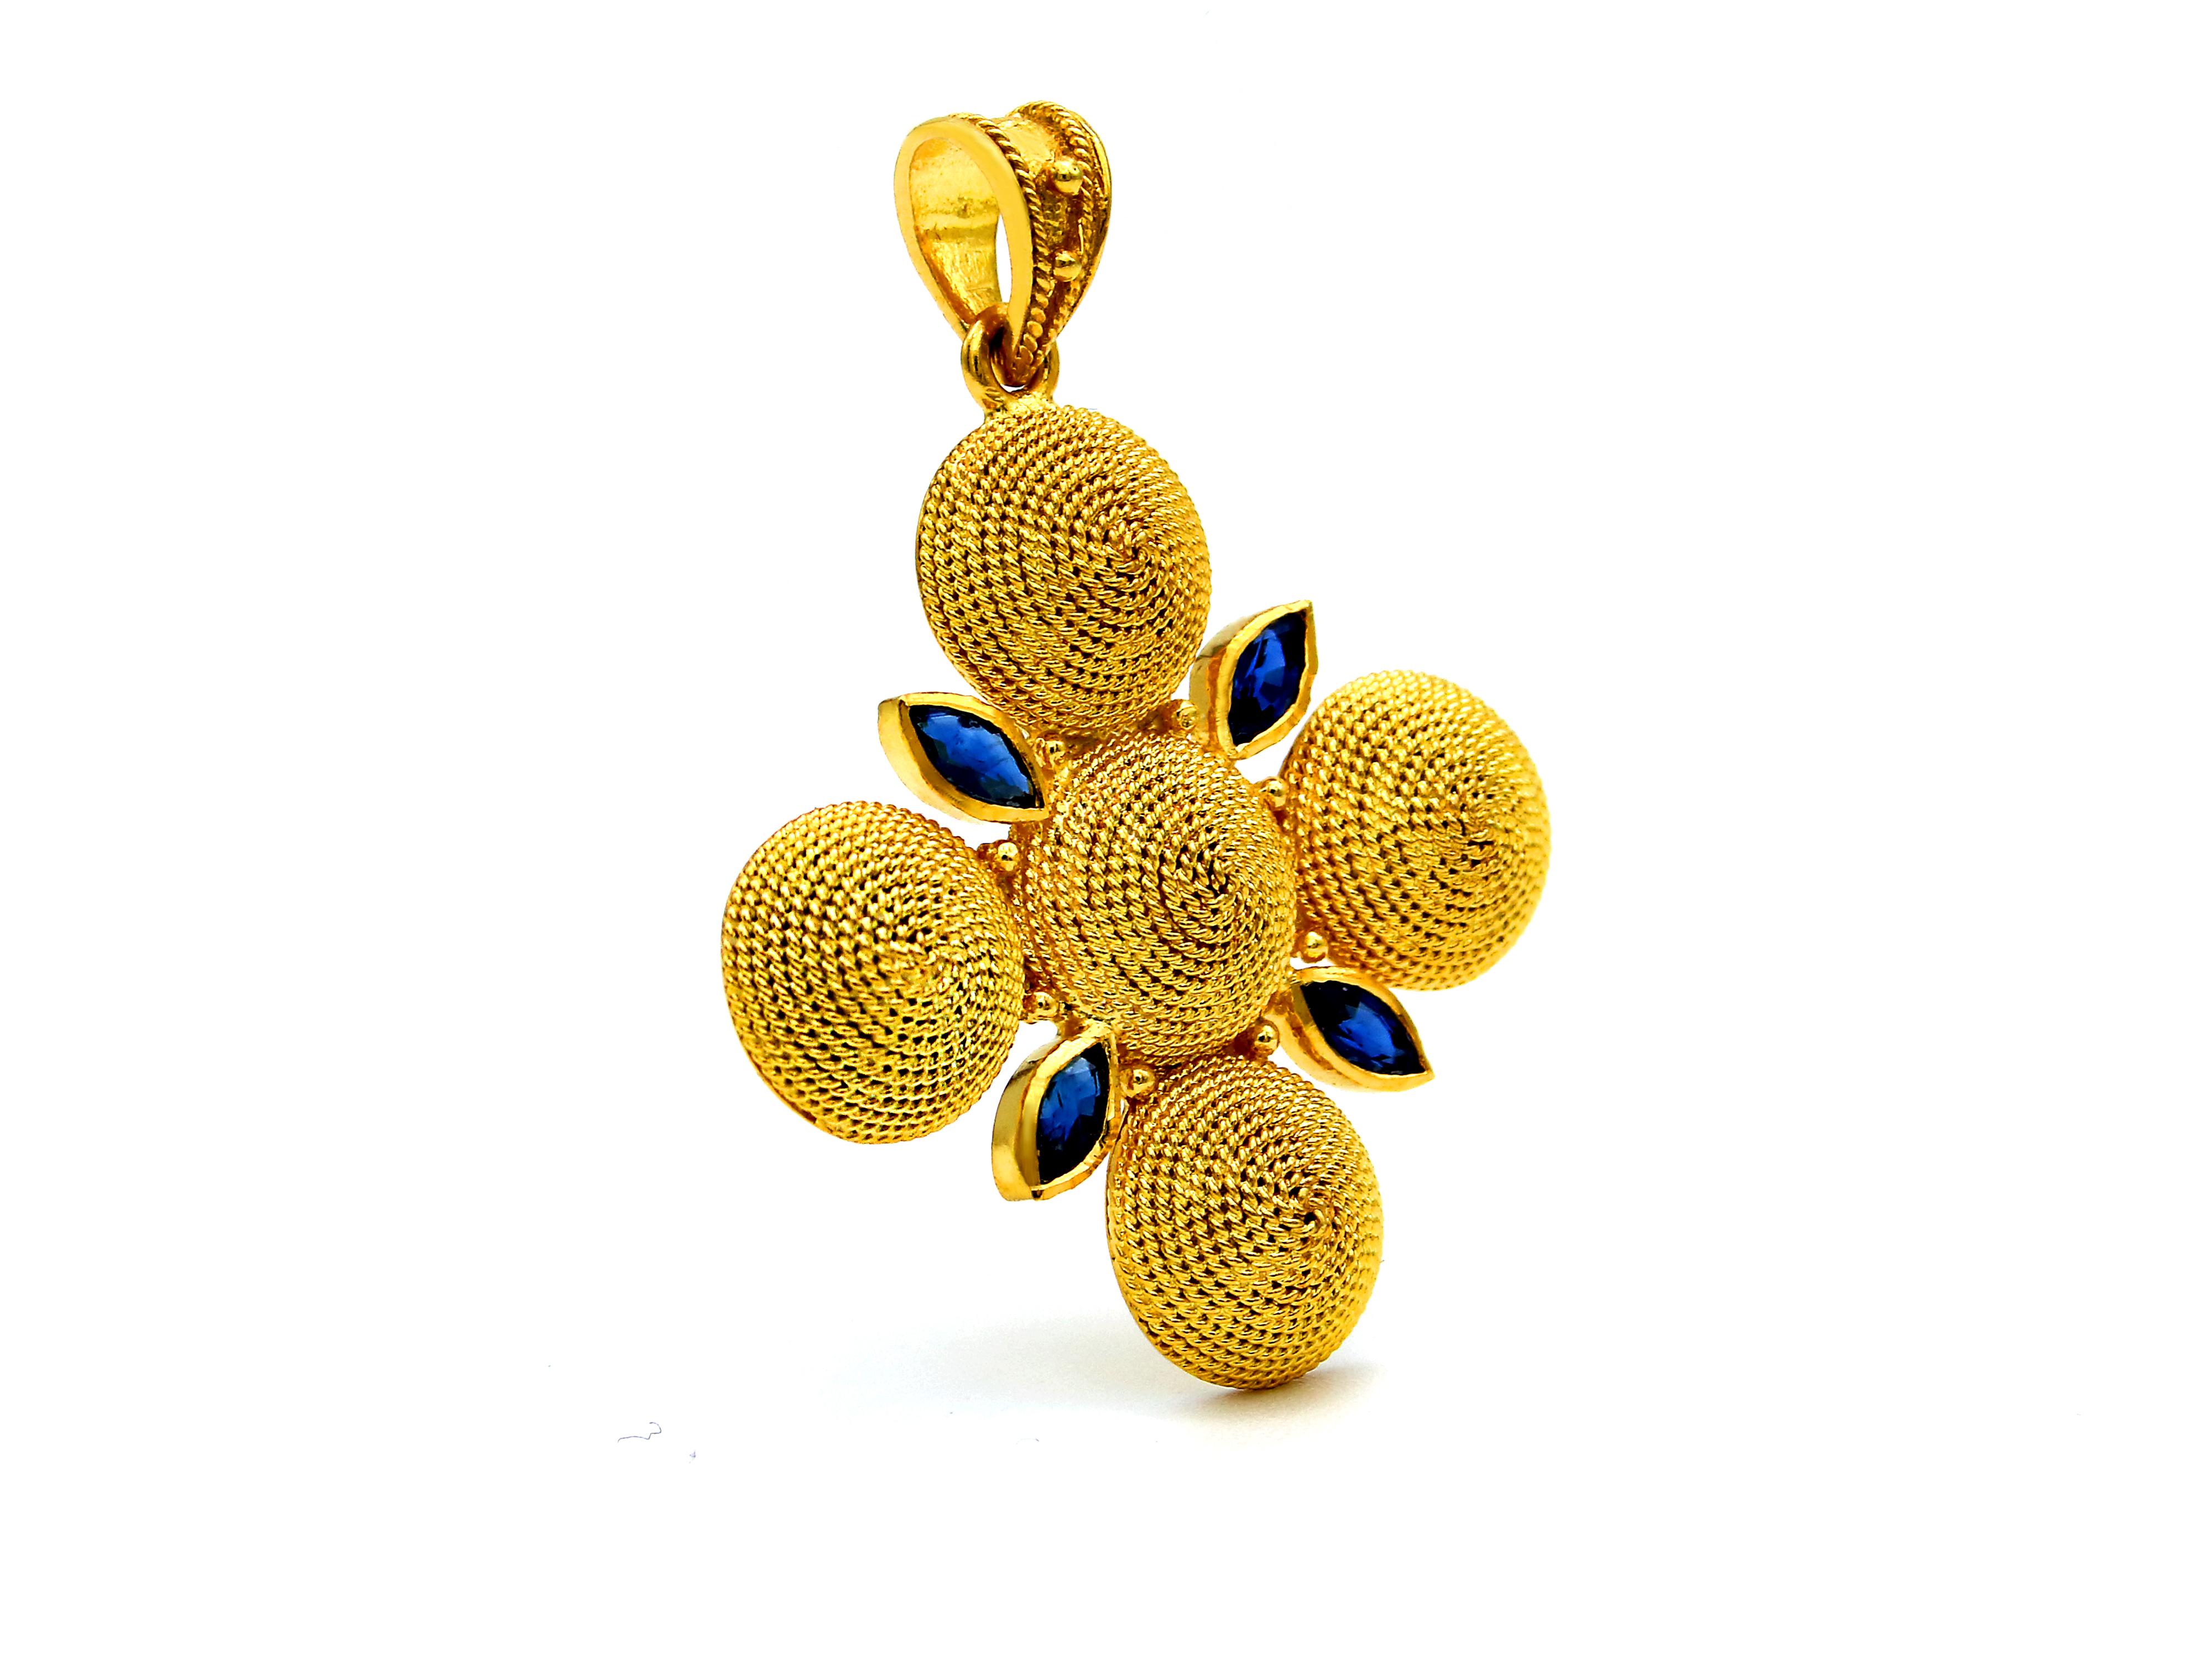 Filigree cross pendant in 18k gold with 0.70 carats sapphires. The smoothness and the peacefulness of the particular filigree work sets it to the most suave feeling that these filigrees create. Peaceful, quiet and precision it’s the motions that I